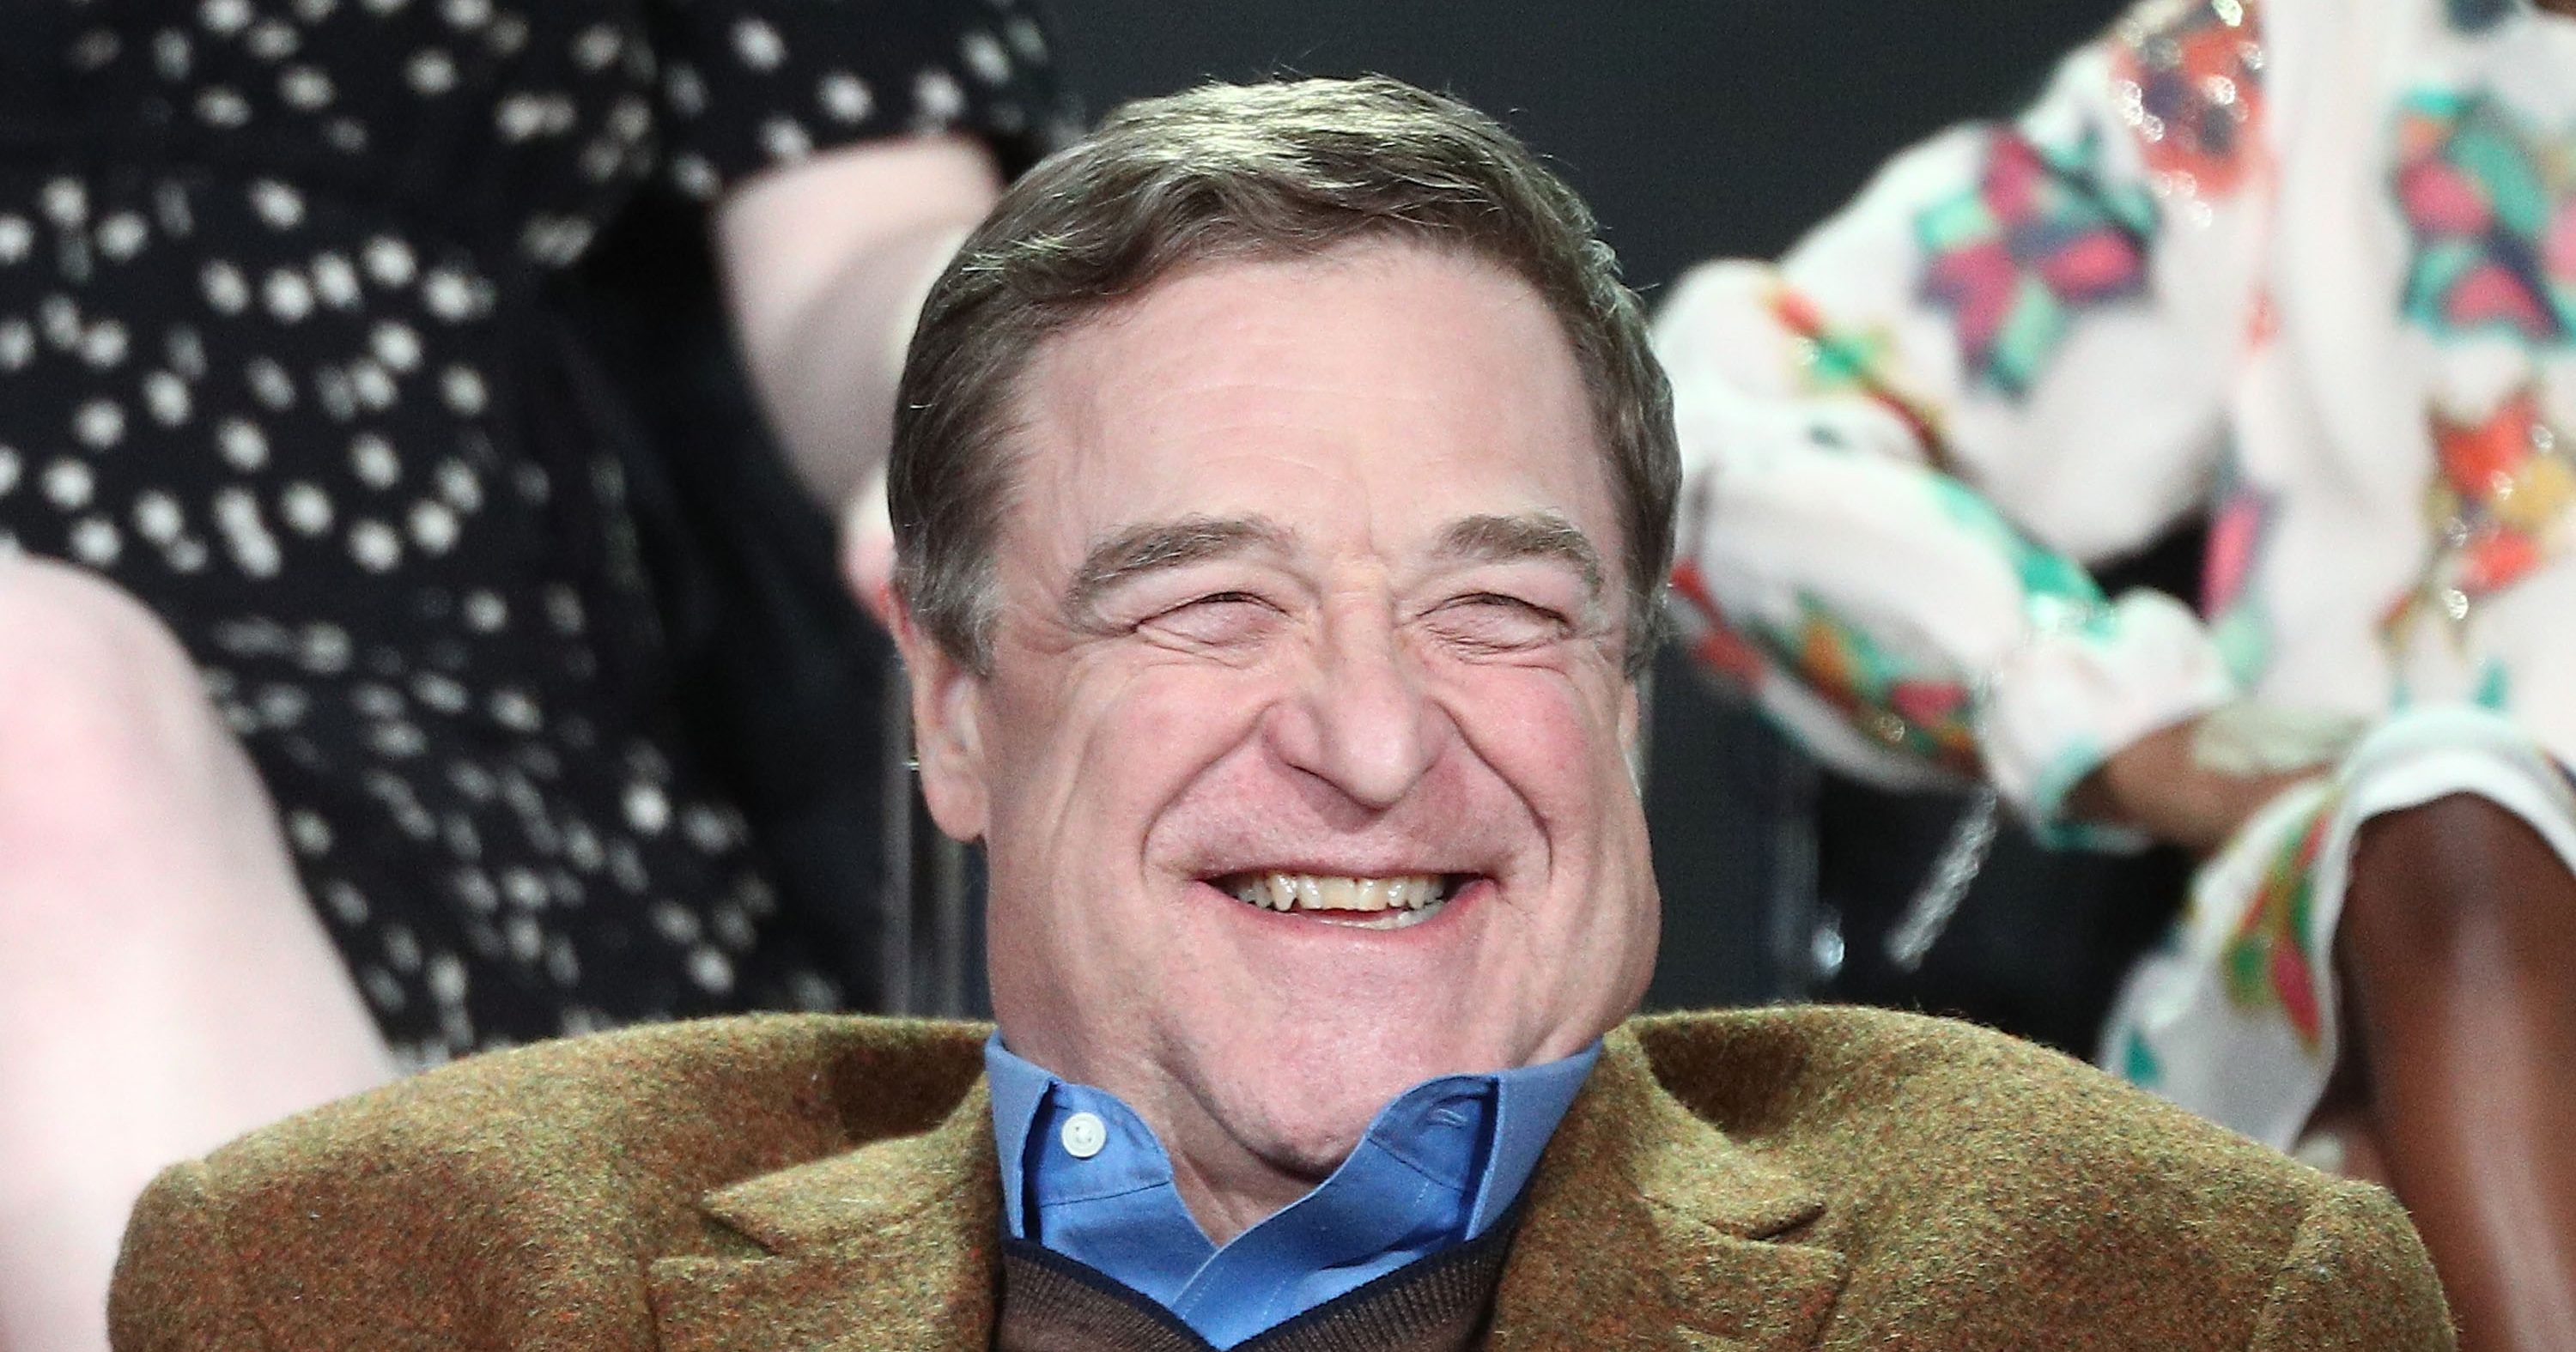 PASADENA, CA - JANUARY 08: Actor John Goodman of the television show Roseanne reacts onstage during the ABC Television/Disney portion of the 2018 Winter Television Critics Association Press Tour at The Langham Huntington, Pasadena on January 8, 2018 in Pasadena, California. (Photo by Frederick M. Brown/Getty Images)